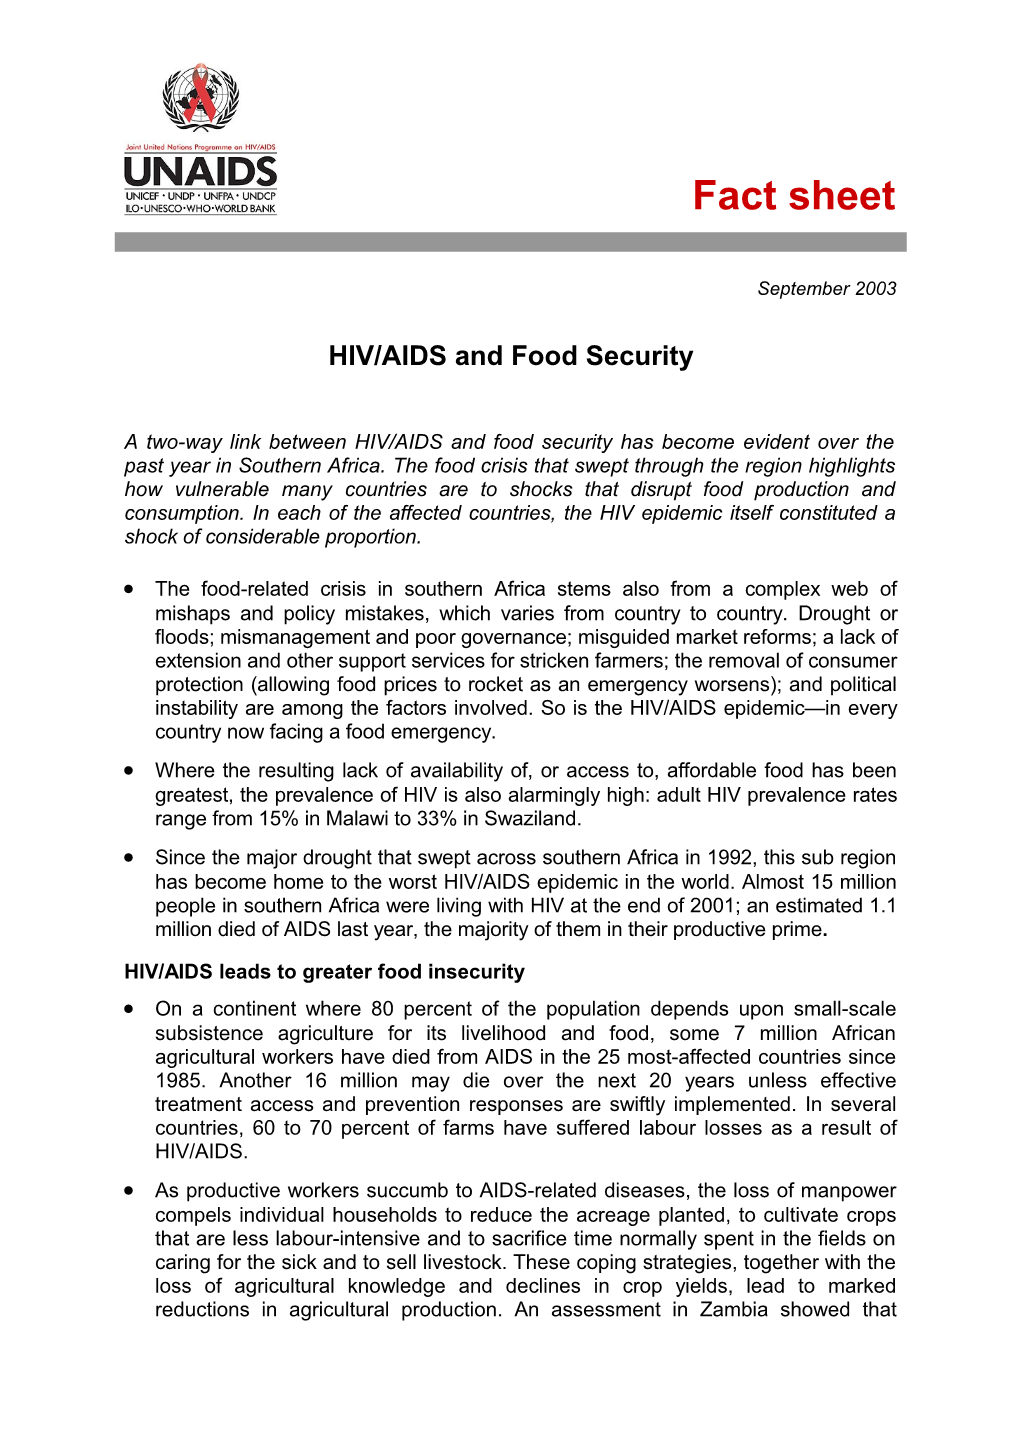 UNAIDS Fact Sheet : HIV/AIDS and Food Security